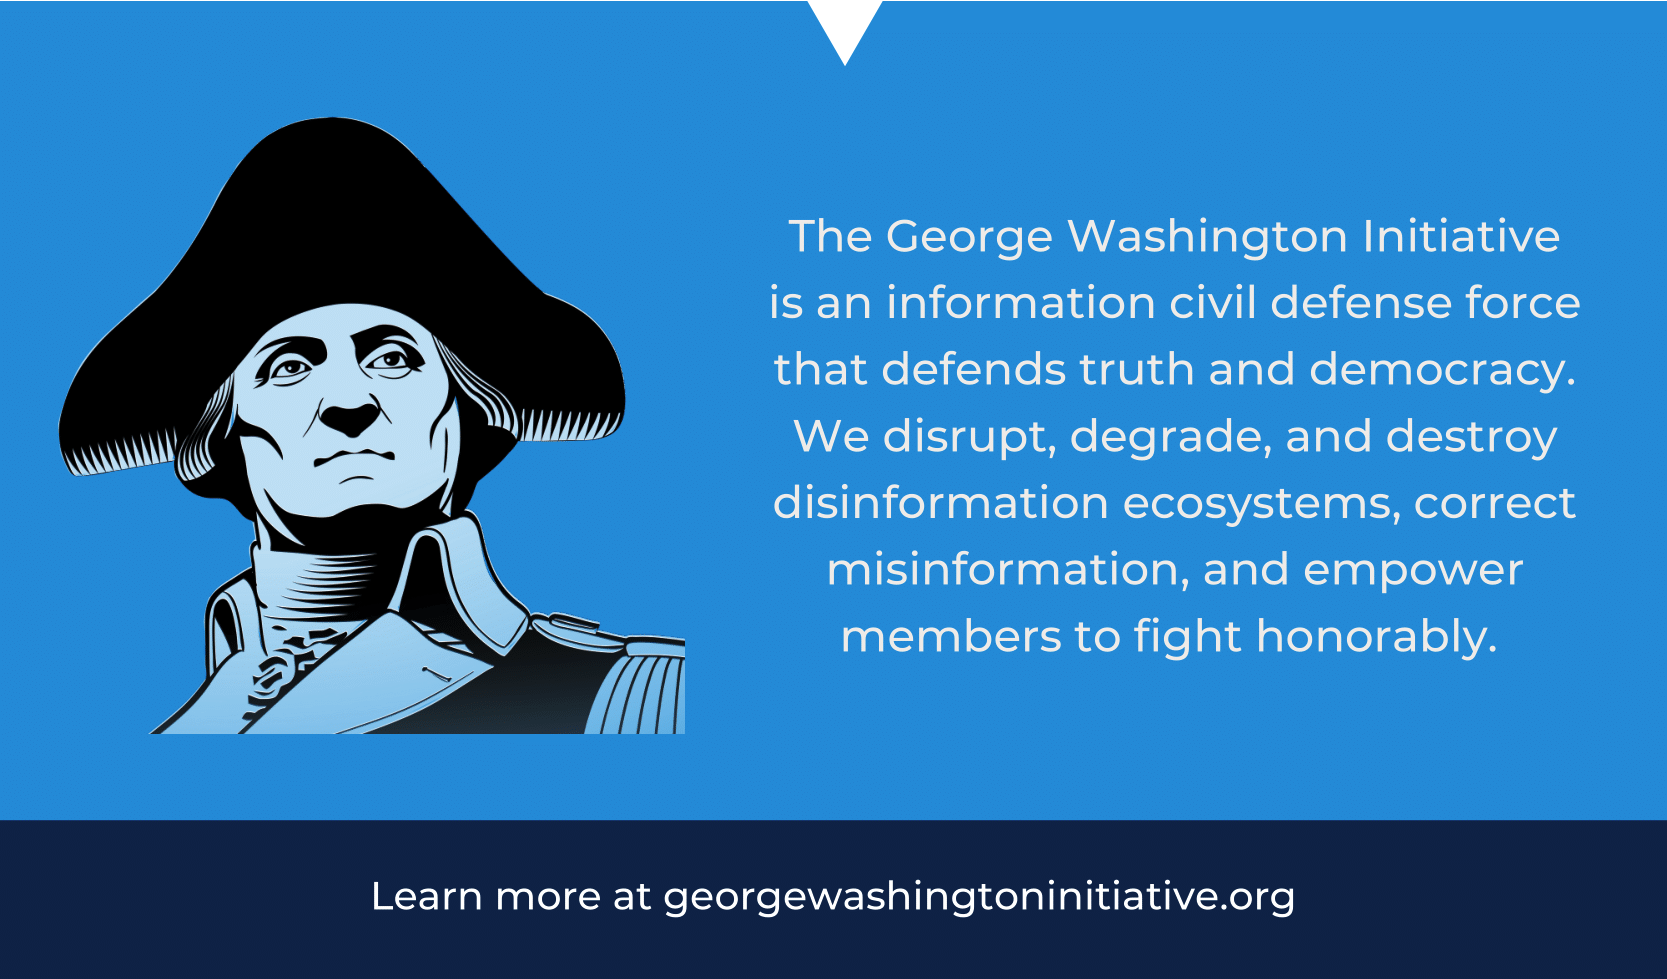 The George Washington Initiative is an information civil defense force that defends truth and democracy. We disrupt, degrade, and destroy disinformation ecosystems, correct misinformation, and empower members to fight honorably.